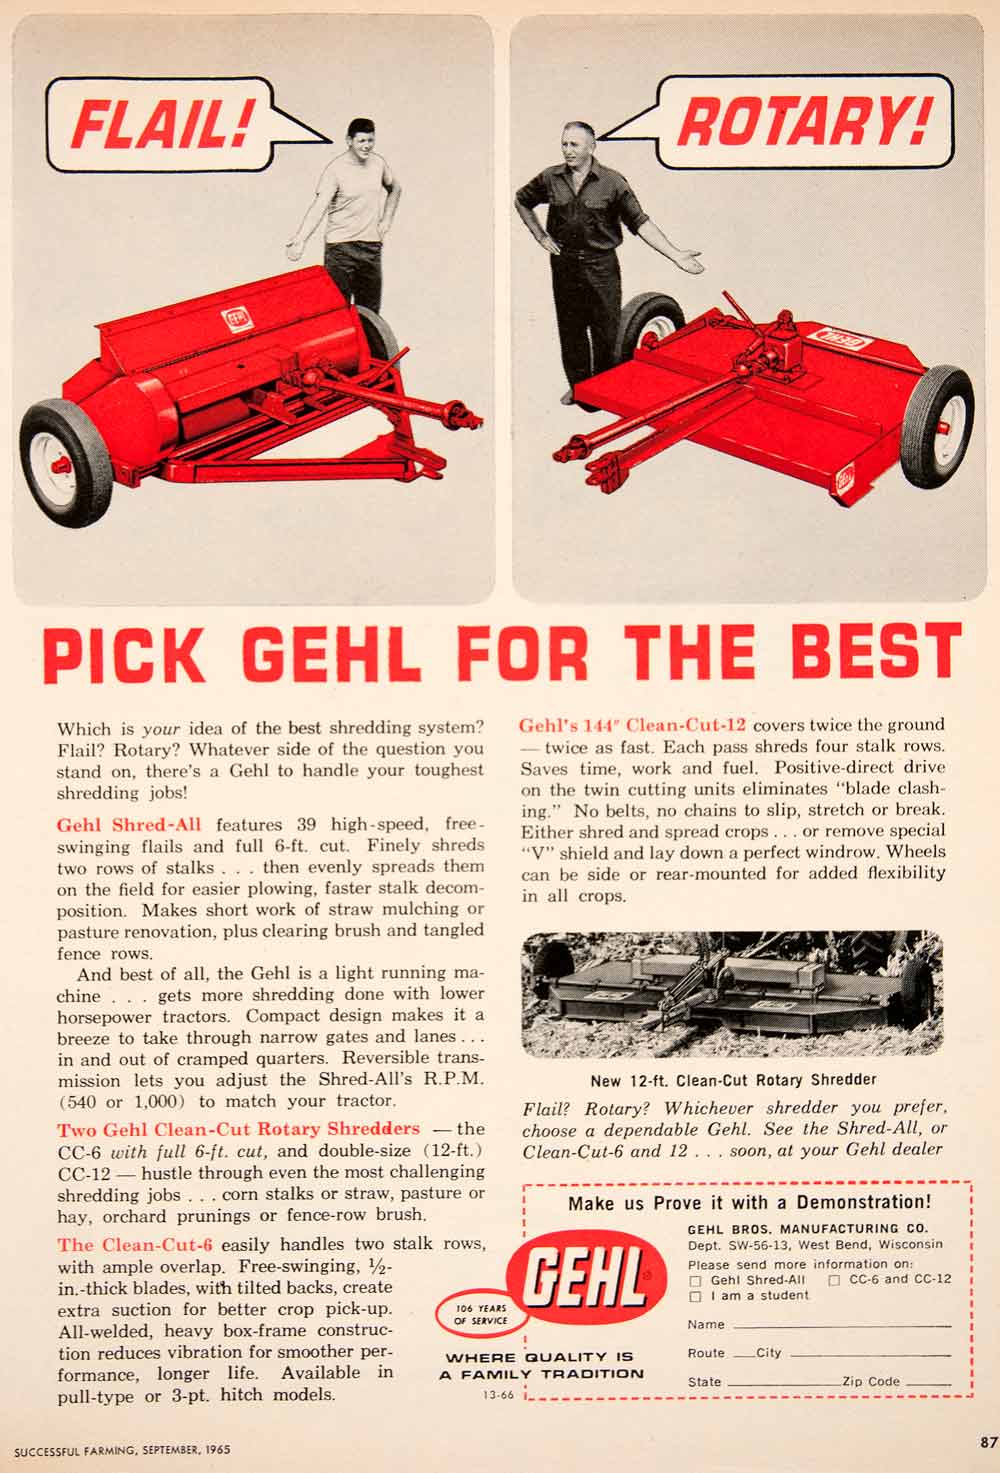 1965 Ad Gehl Brothers Manufacturing Rotary Farming Implement Tool Shredder SF1